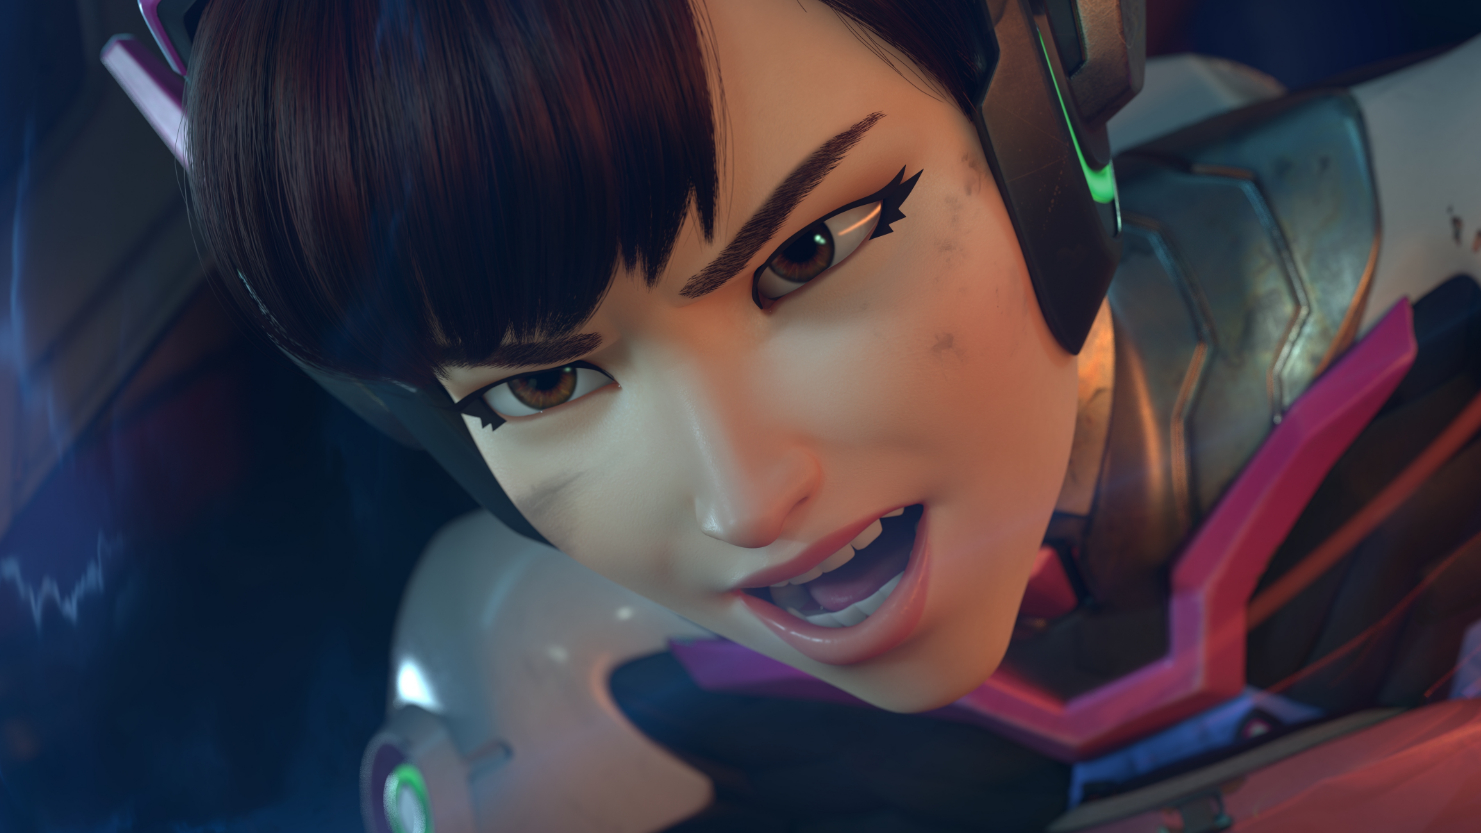 Overwatch D.Va character – tips and tricks to get the most from their  abilities and ultimate